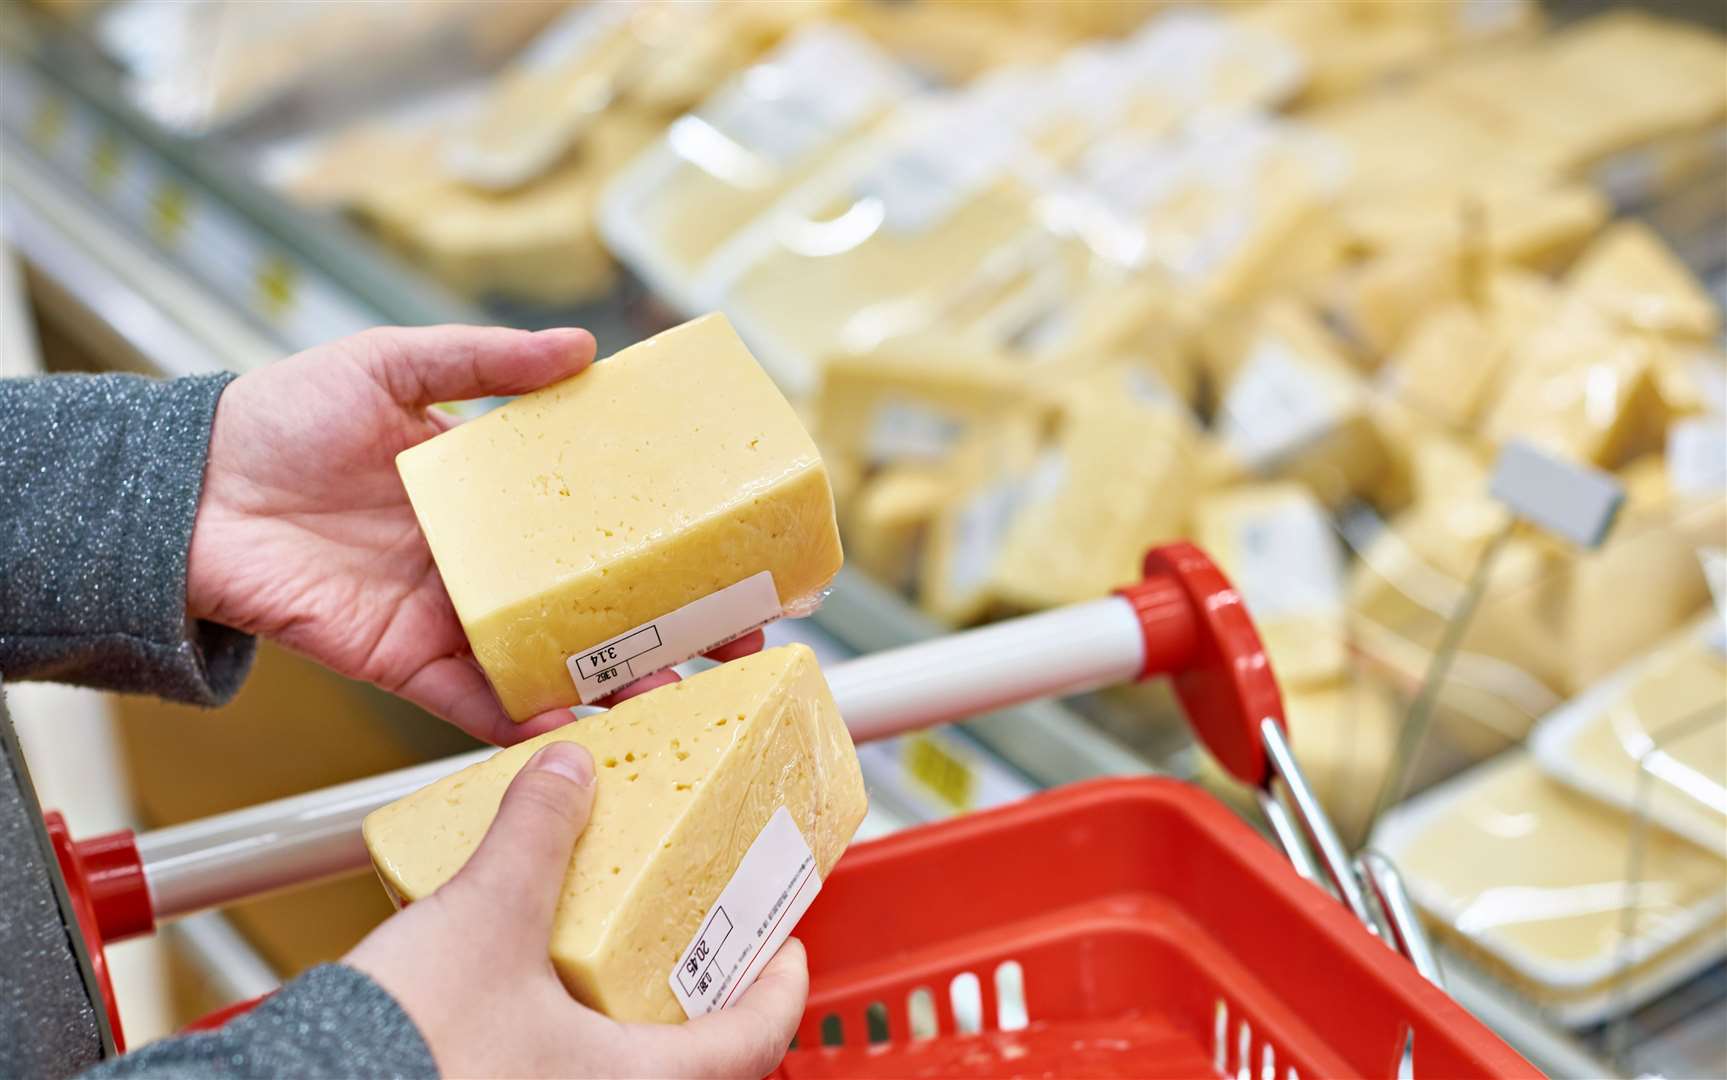 Ramsden stole meat and cheese products from the Co-op. Stock picture: iStock